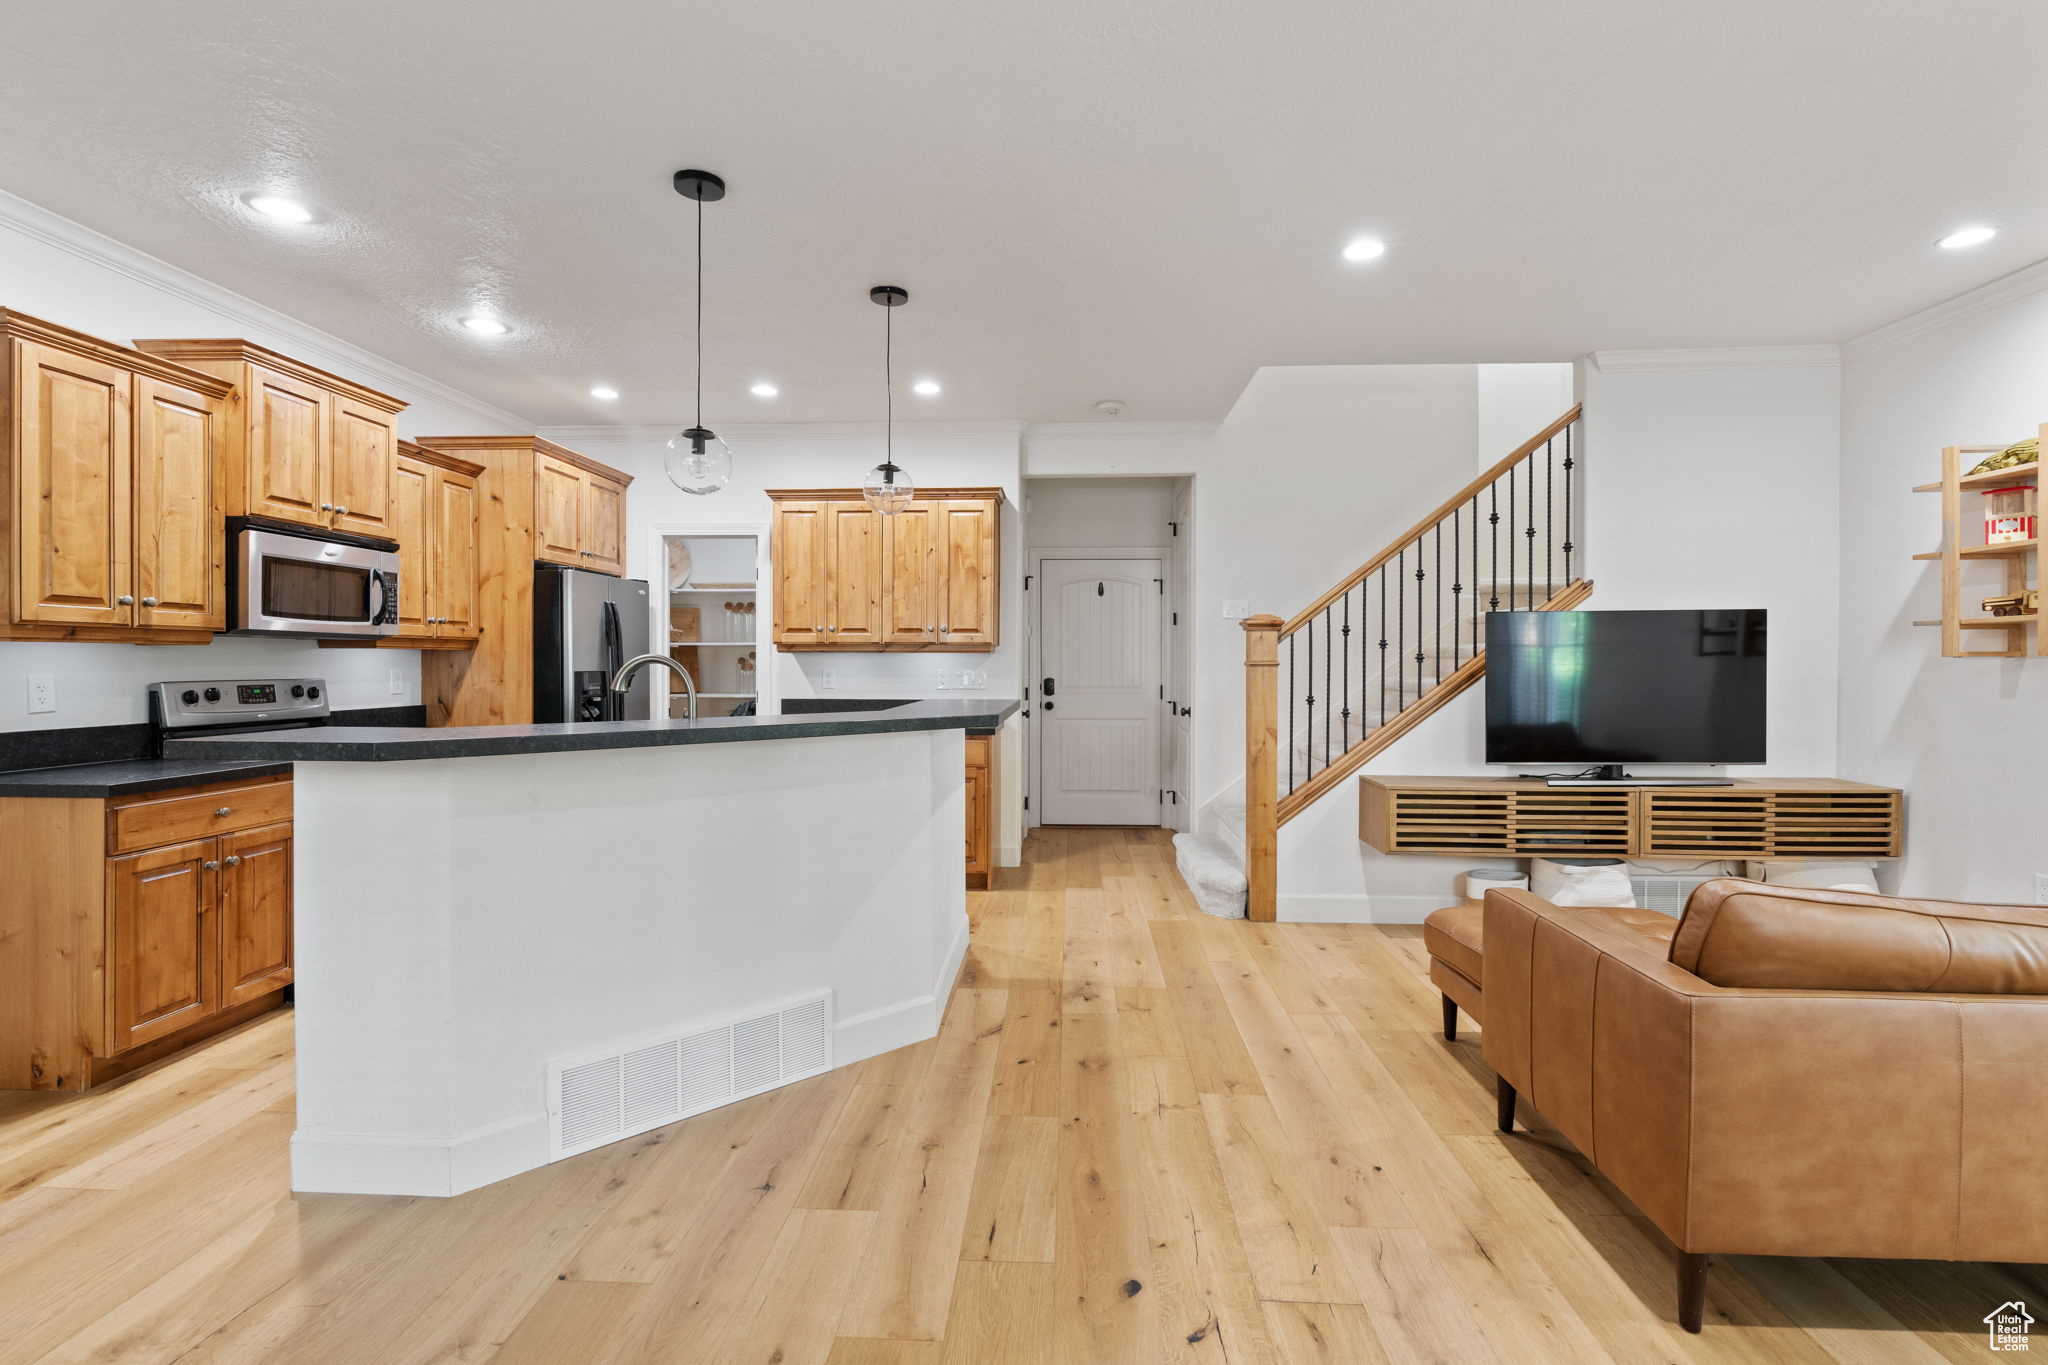 Kitchen featuring crown molding, light hardwood / wood-style flooring, pendant lighting, and stainless steel appliances